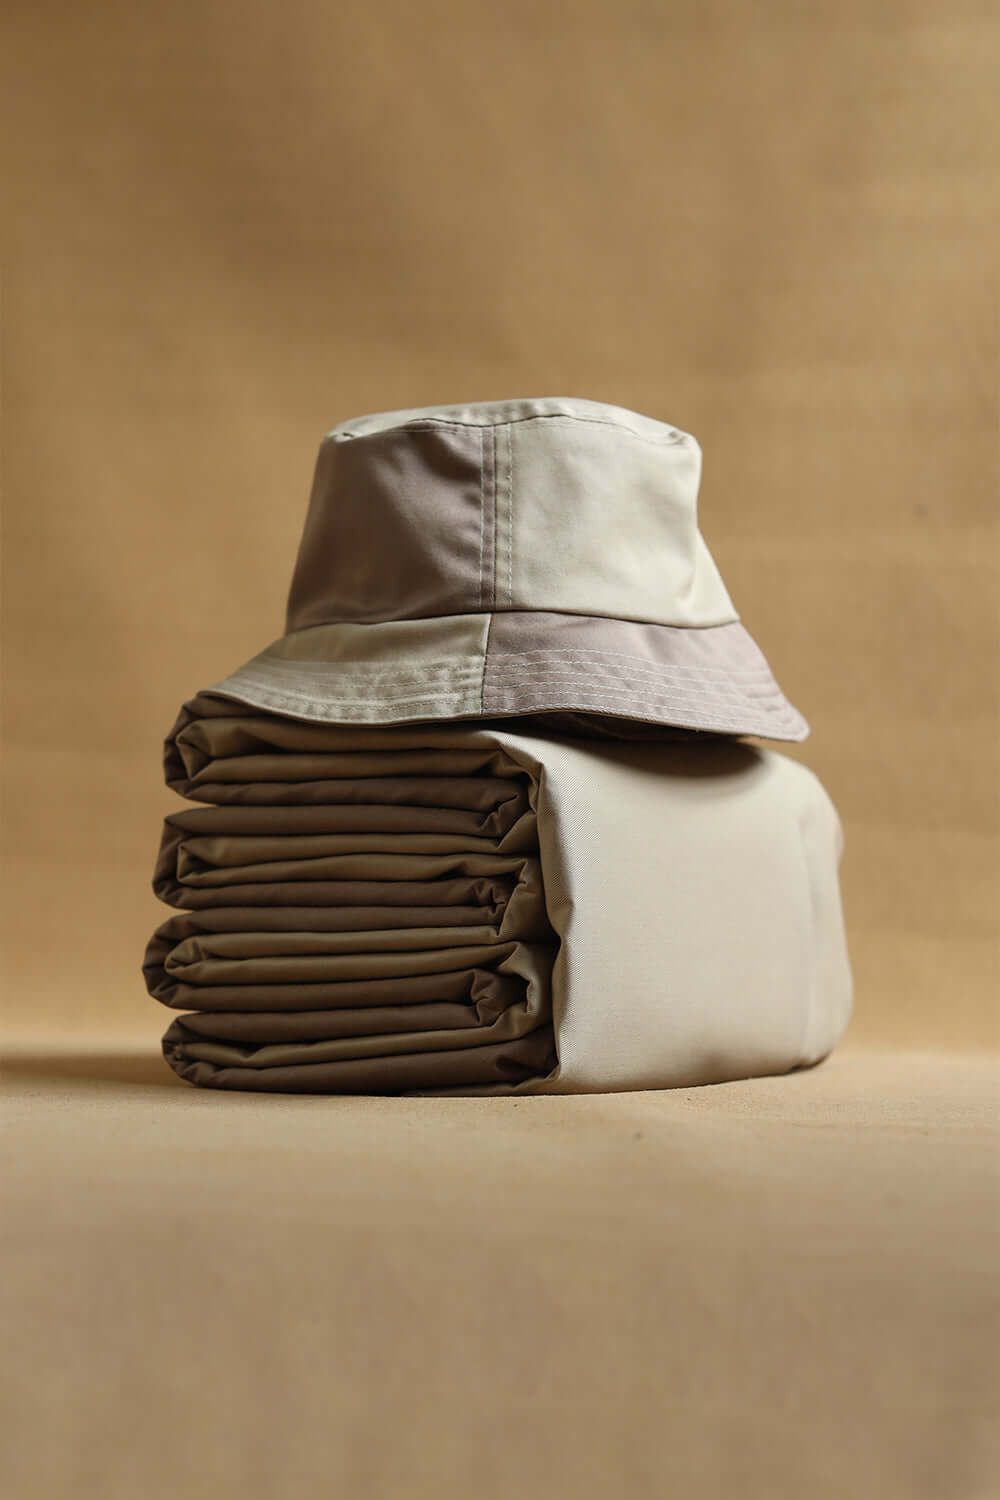 DIY Do It Yourself Sewing Kit for Fashionable Clothes Brown Bucket Hat